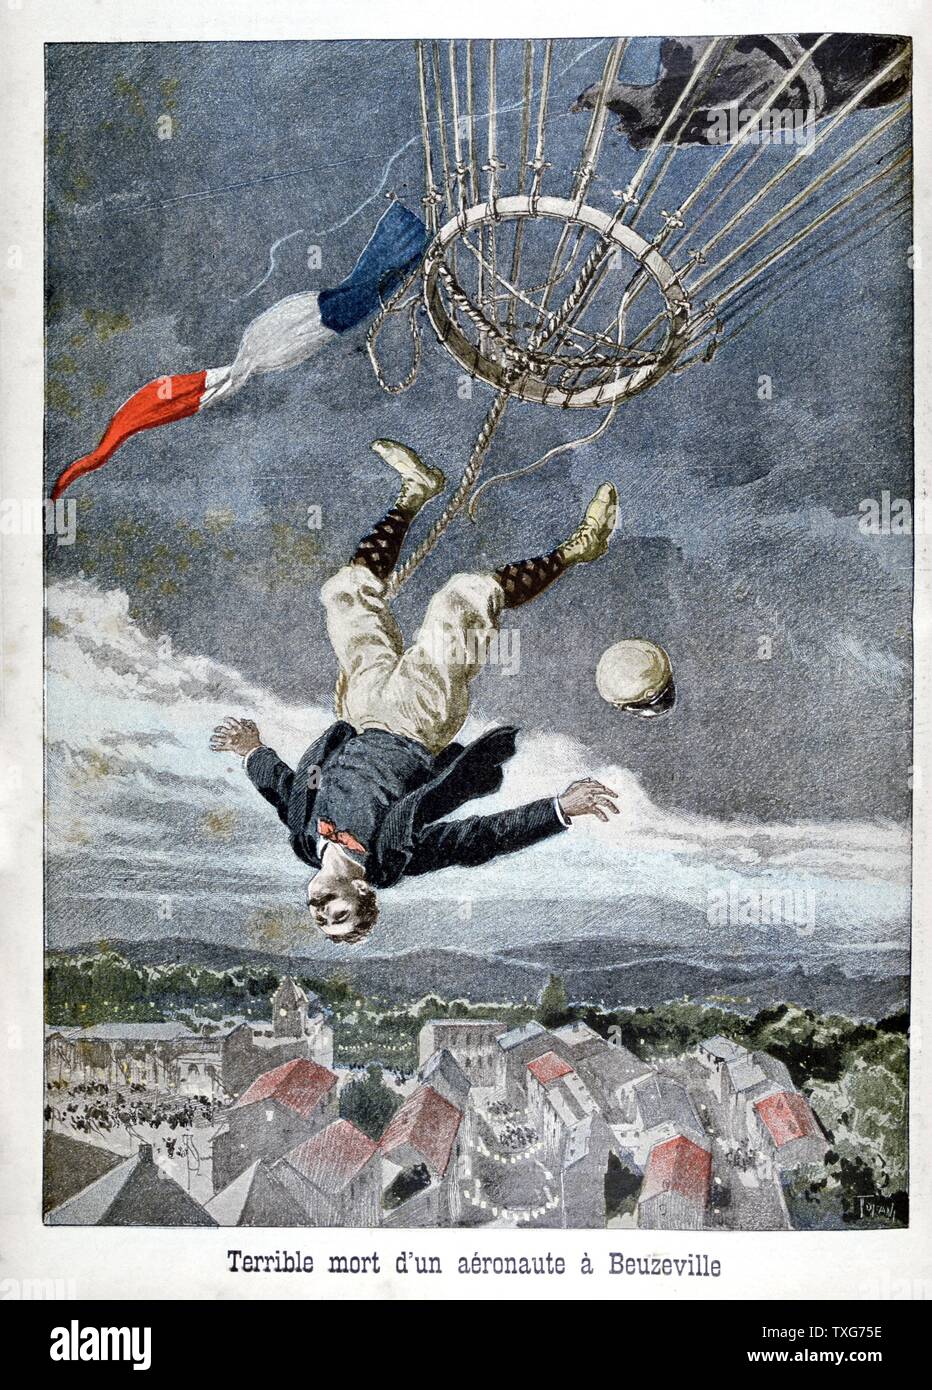 A French aeronaut falling from a balloon over Beuzeville, France  From 'Le Petit Journal' 30 June 1899 Stock Photo